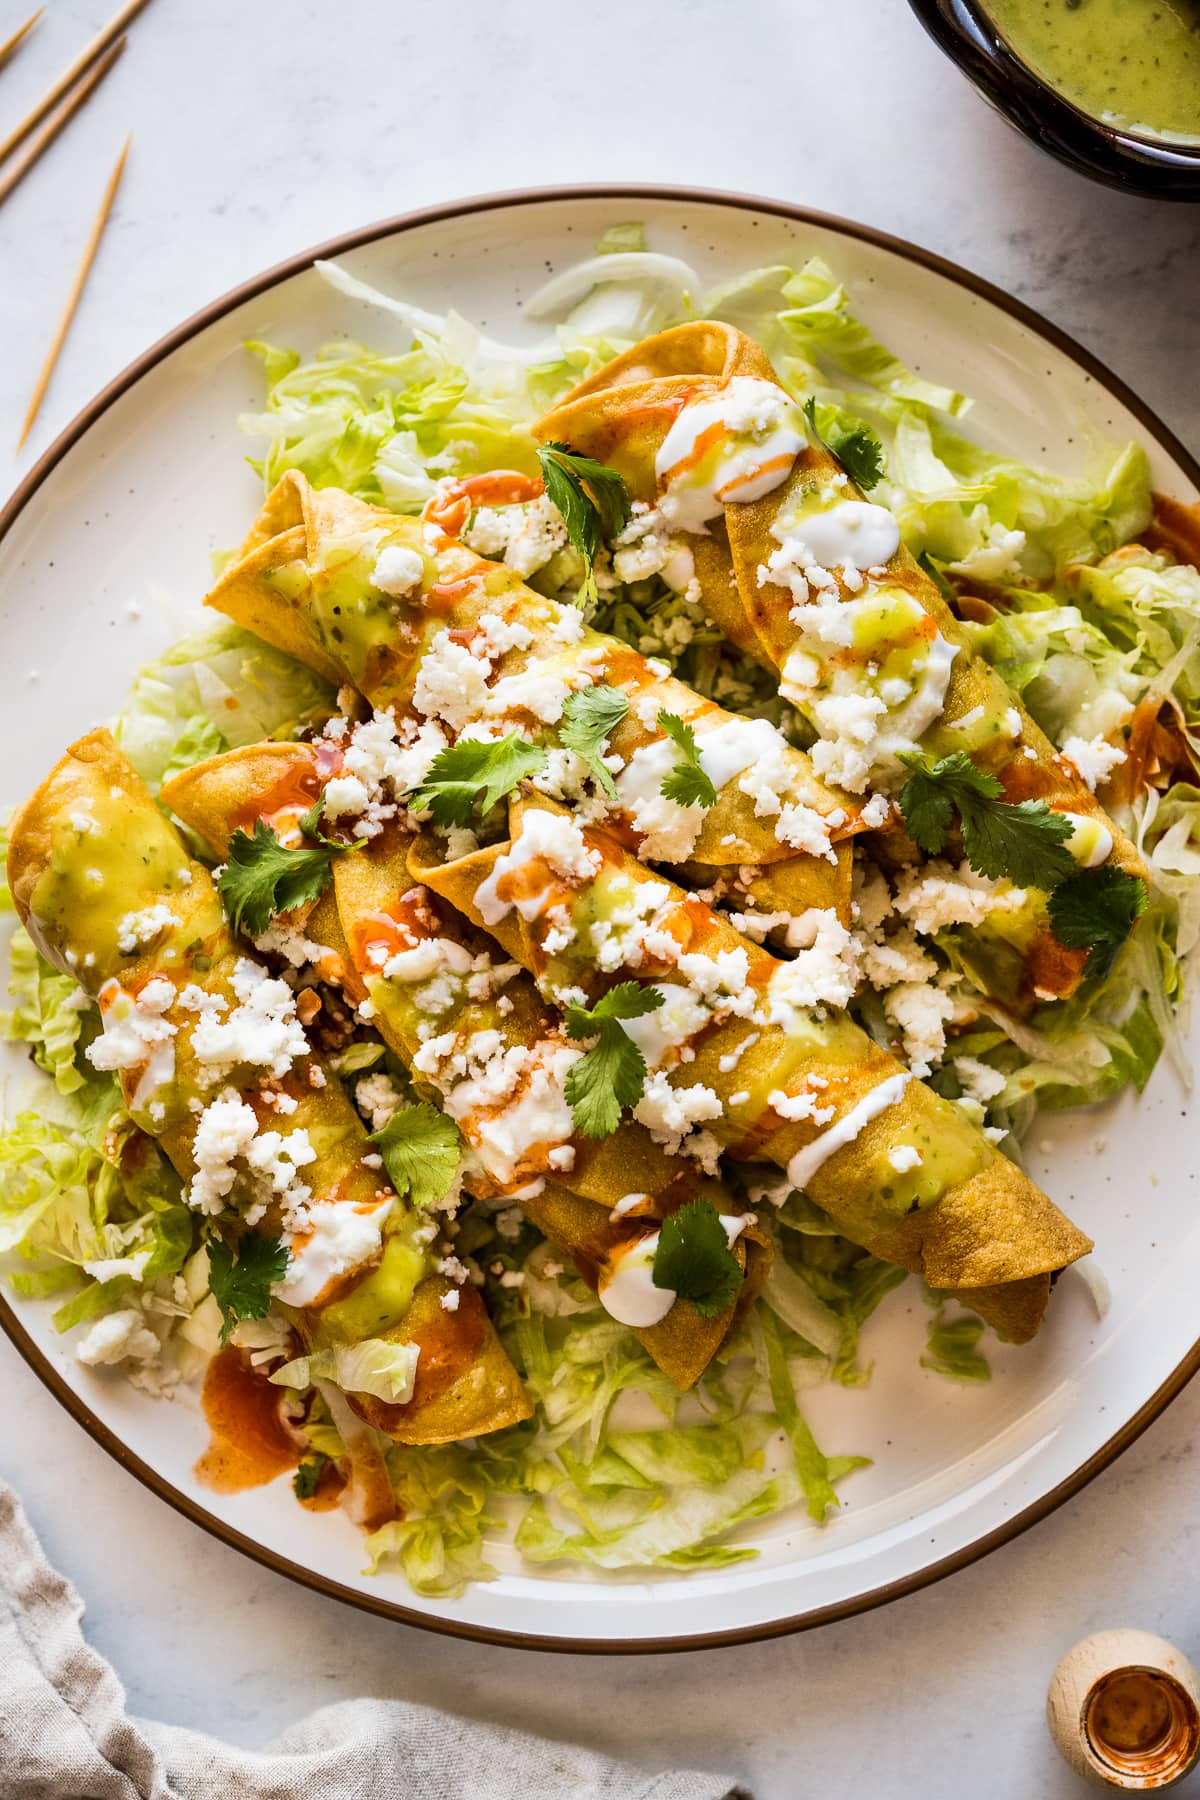 Flautas on a plate topped with crema, hot sauce, salsa verde, lettuce, cilantro, and cotija cheese.